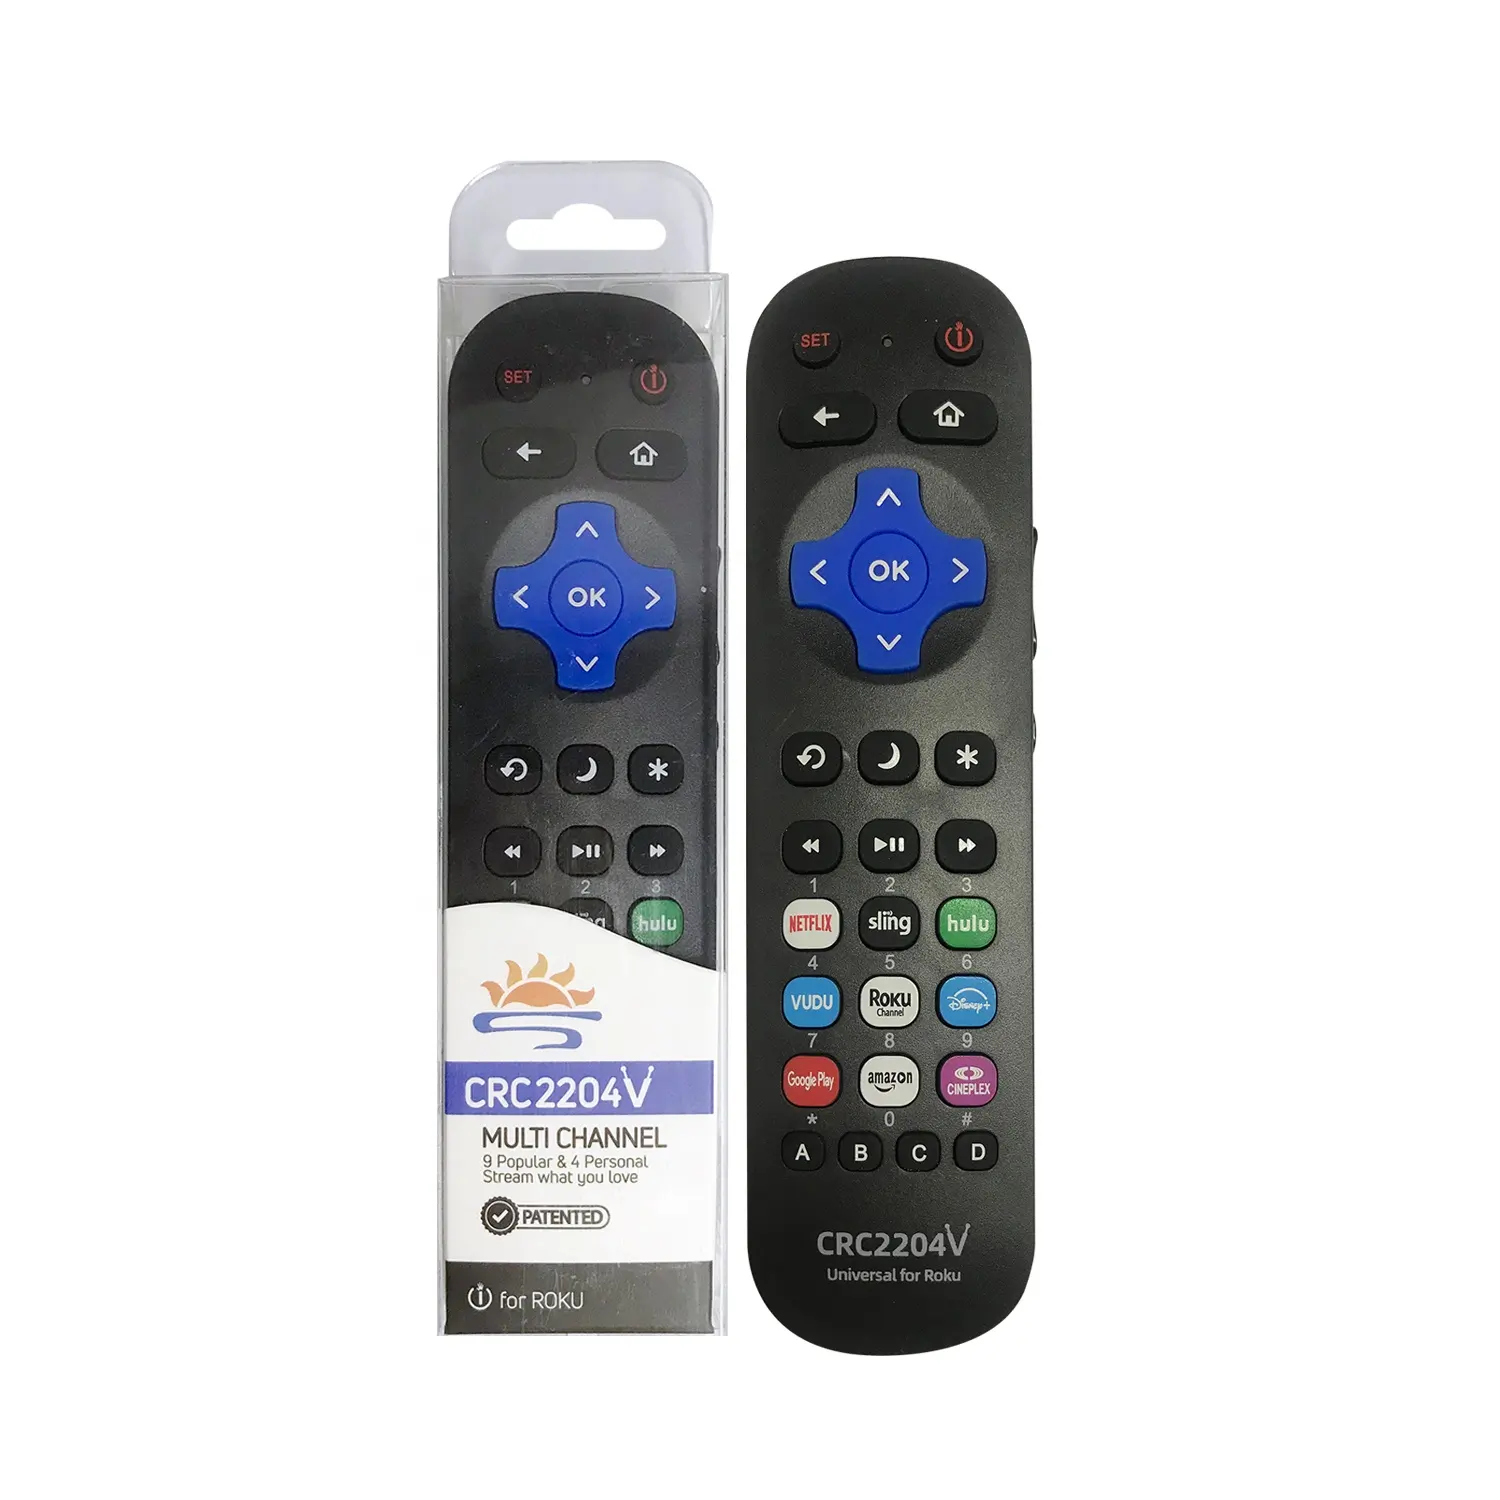 CRC2204V Universal Remote Control for Roku TVs fit for all brand Works with most Roku devices including shortcut buttons